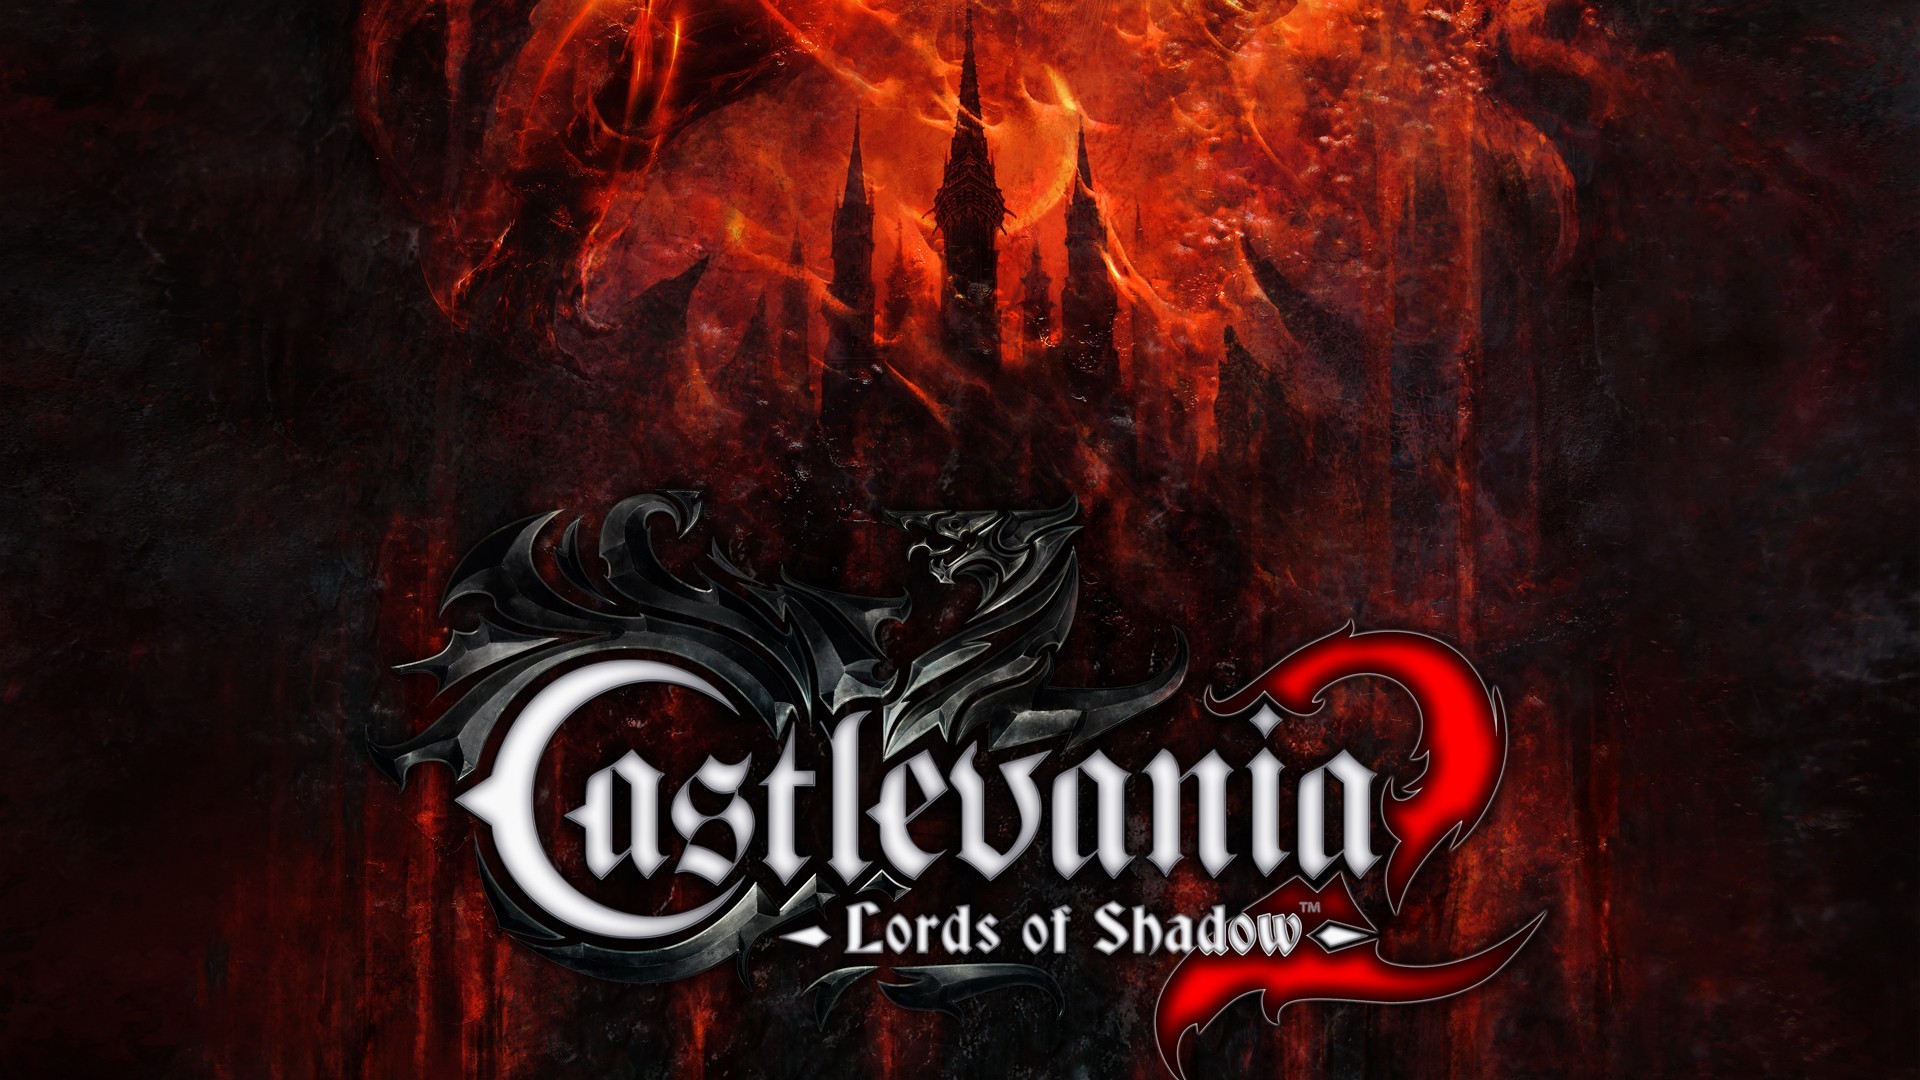 castlevania lords of shadow icon download